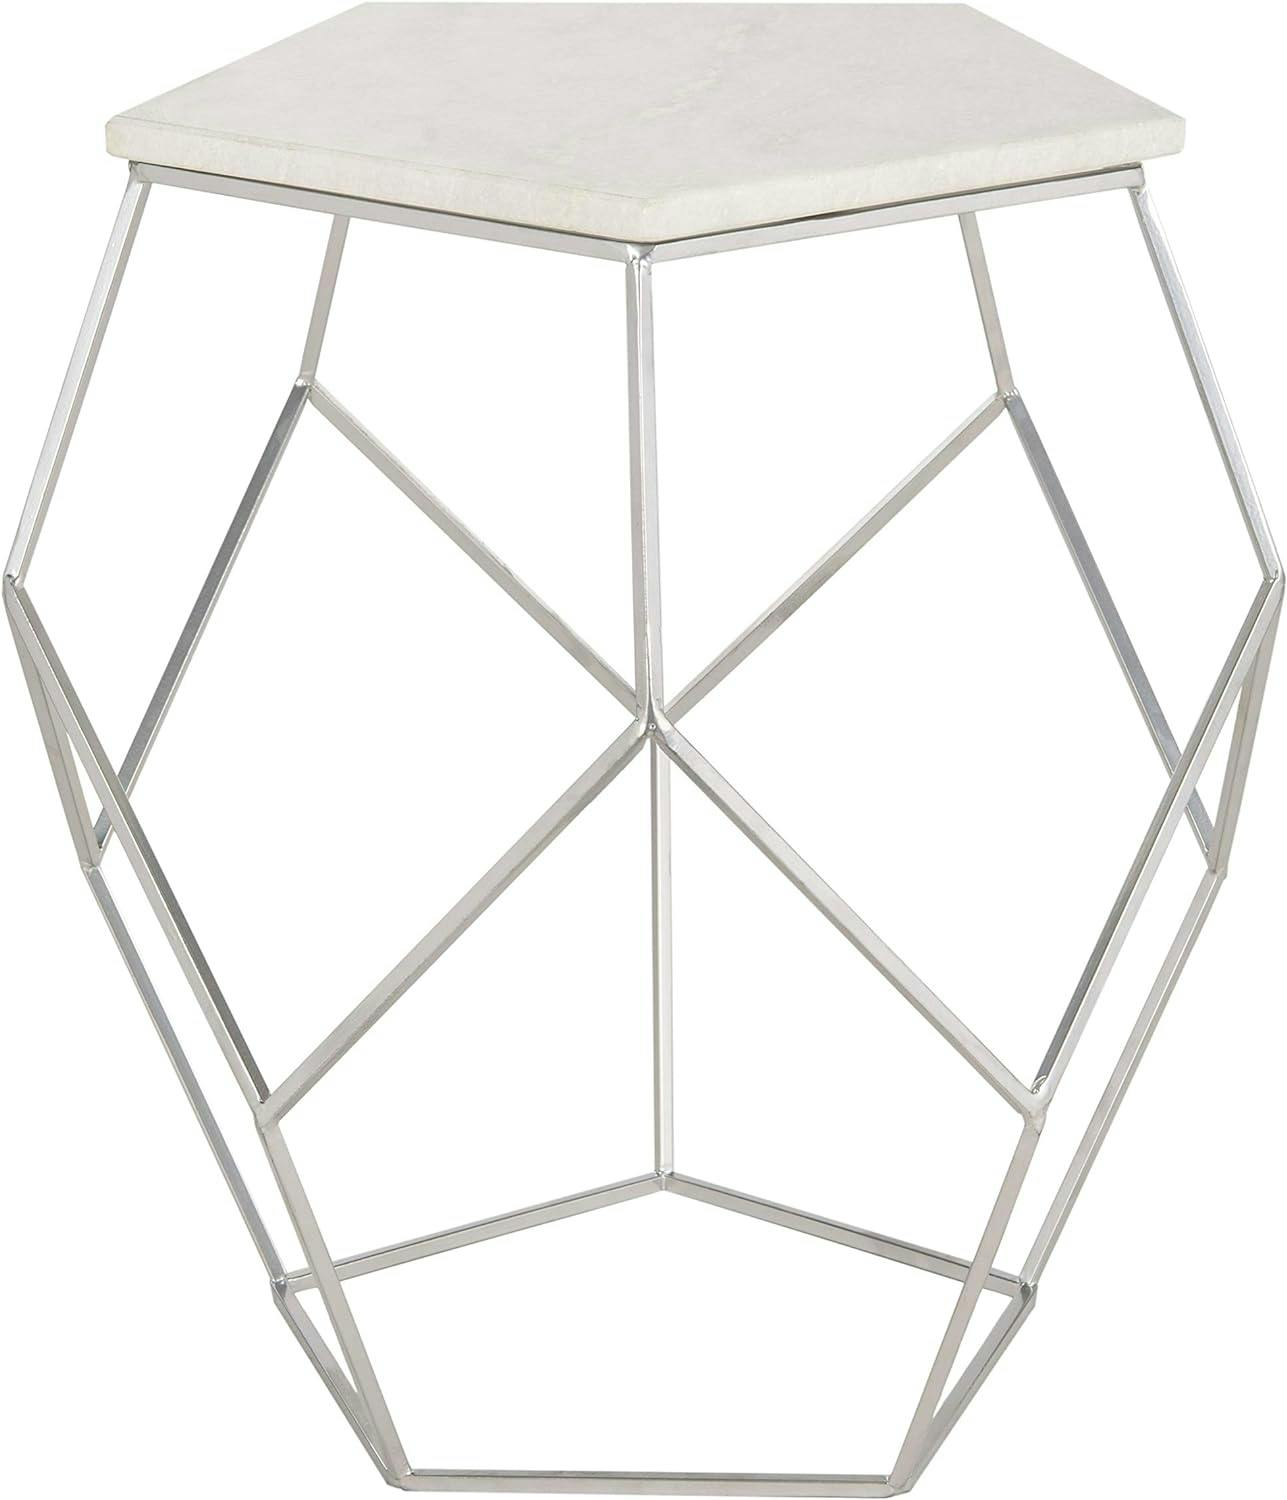 Transitional Hexagonal 18" Silver Stone & Metal Side Table